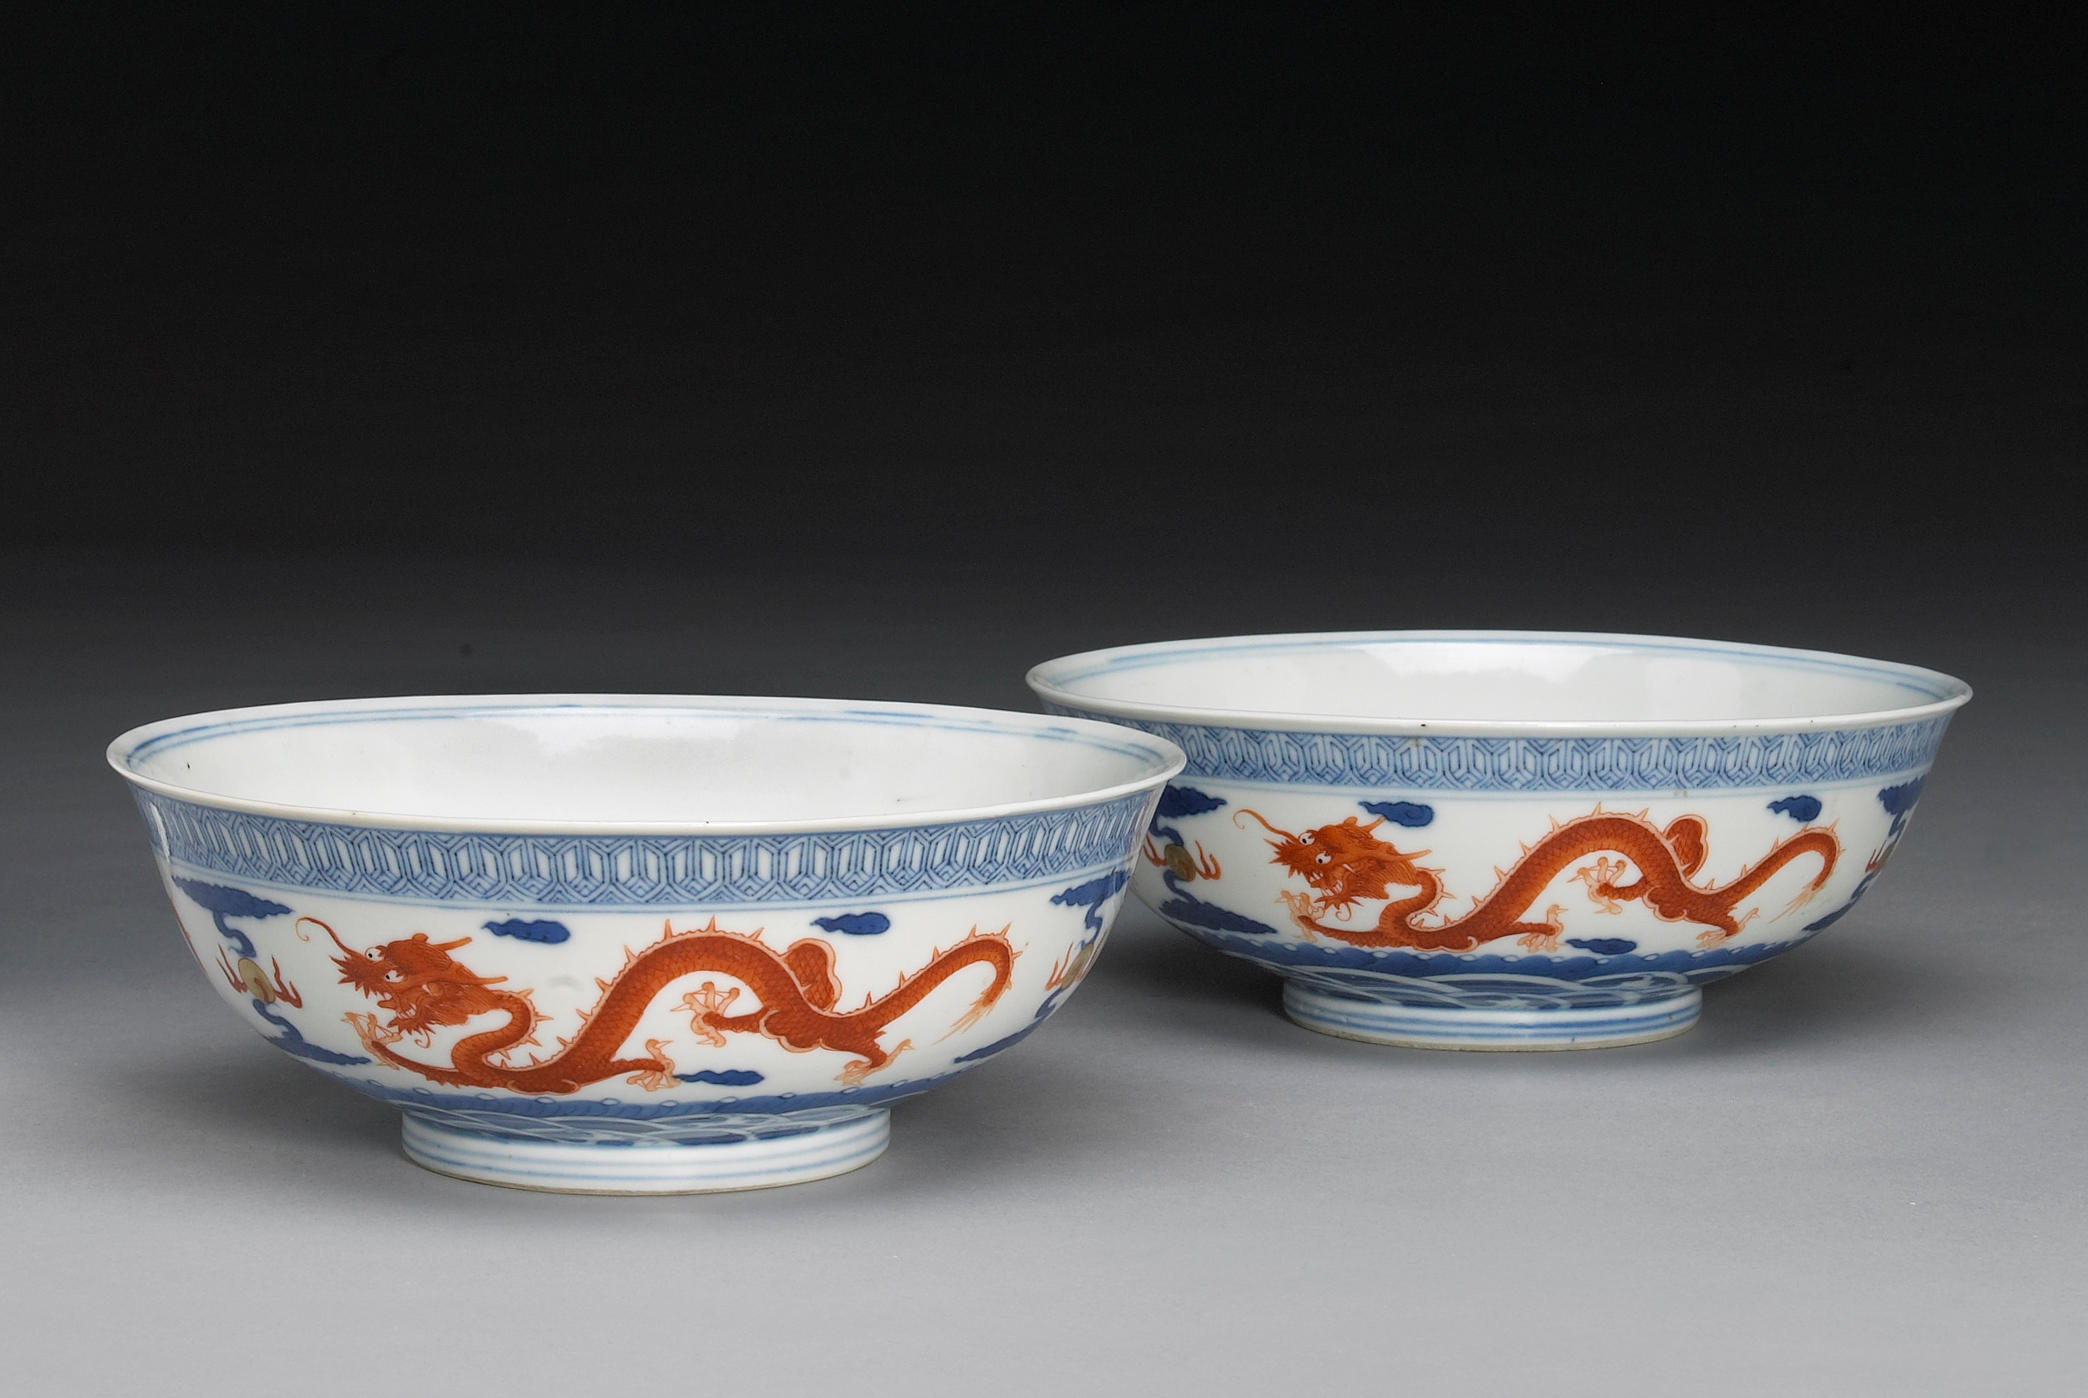 A pair of underglaze blue and iron red enameled porcelain deep bowls